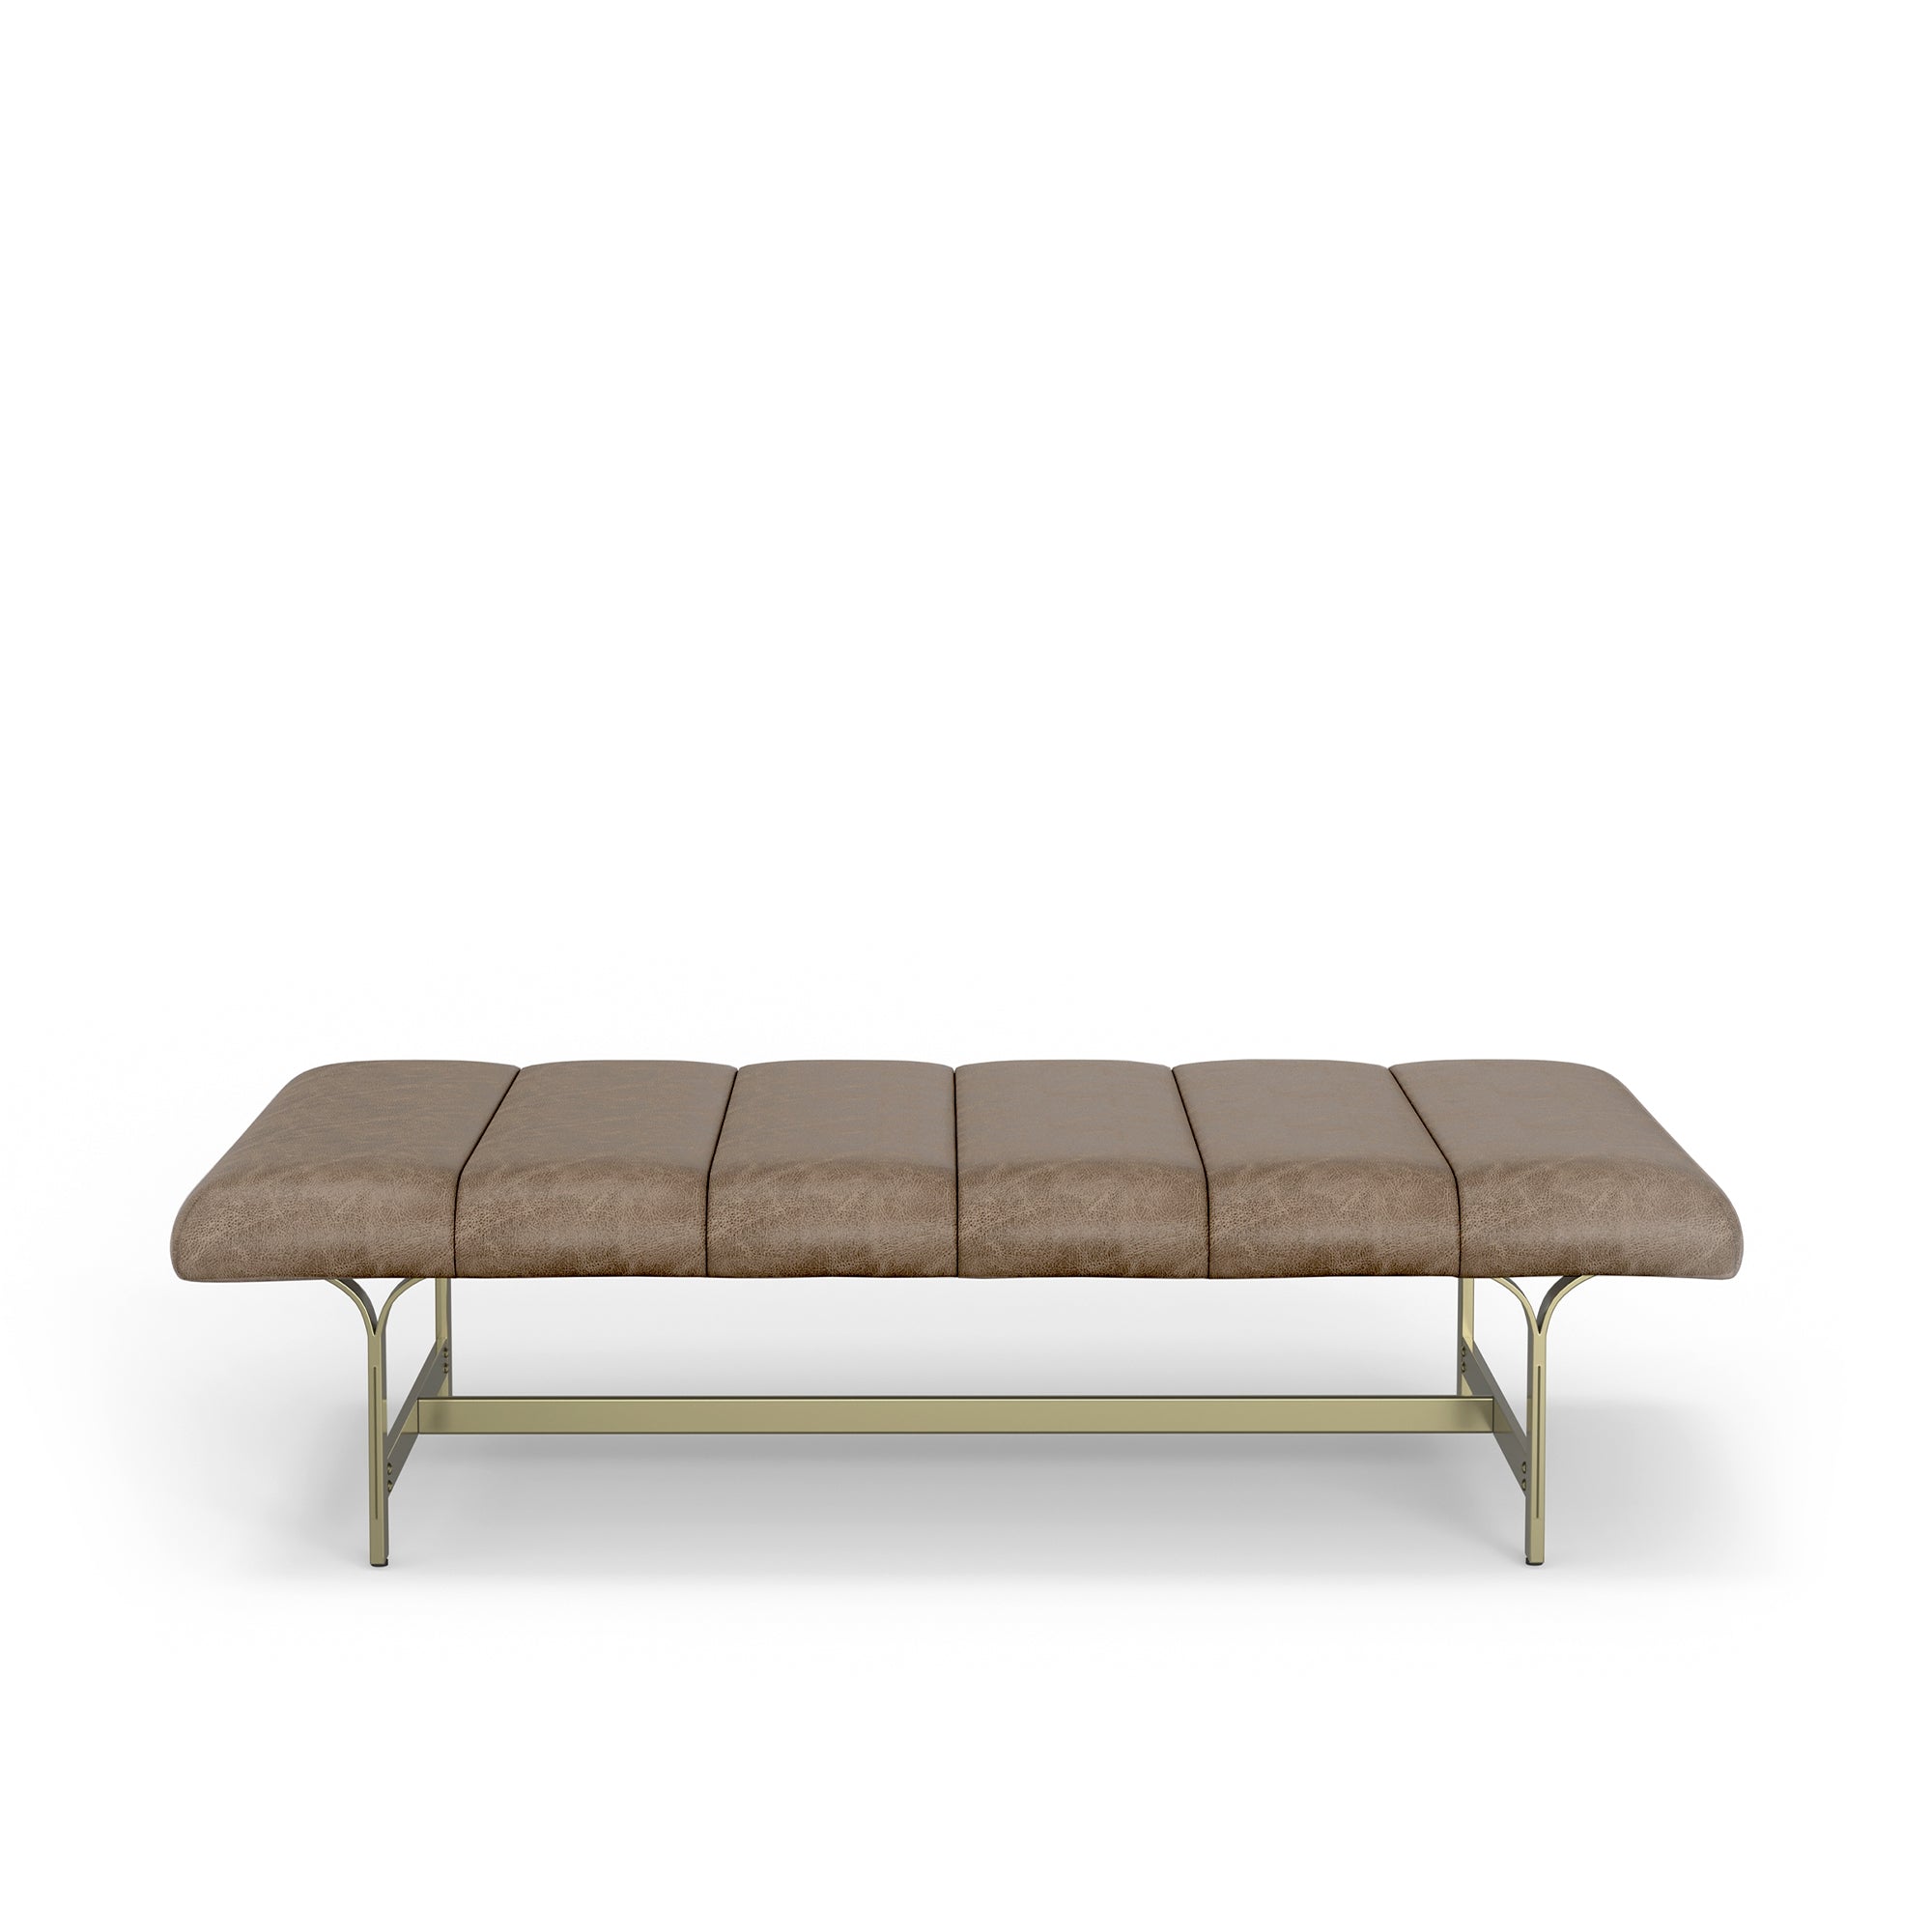 A Upholstered Leather Coffee Table with Metal Base